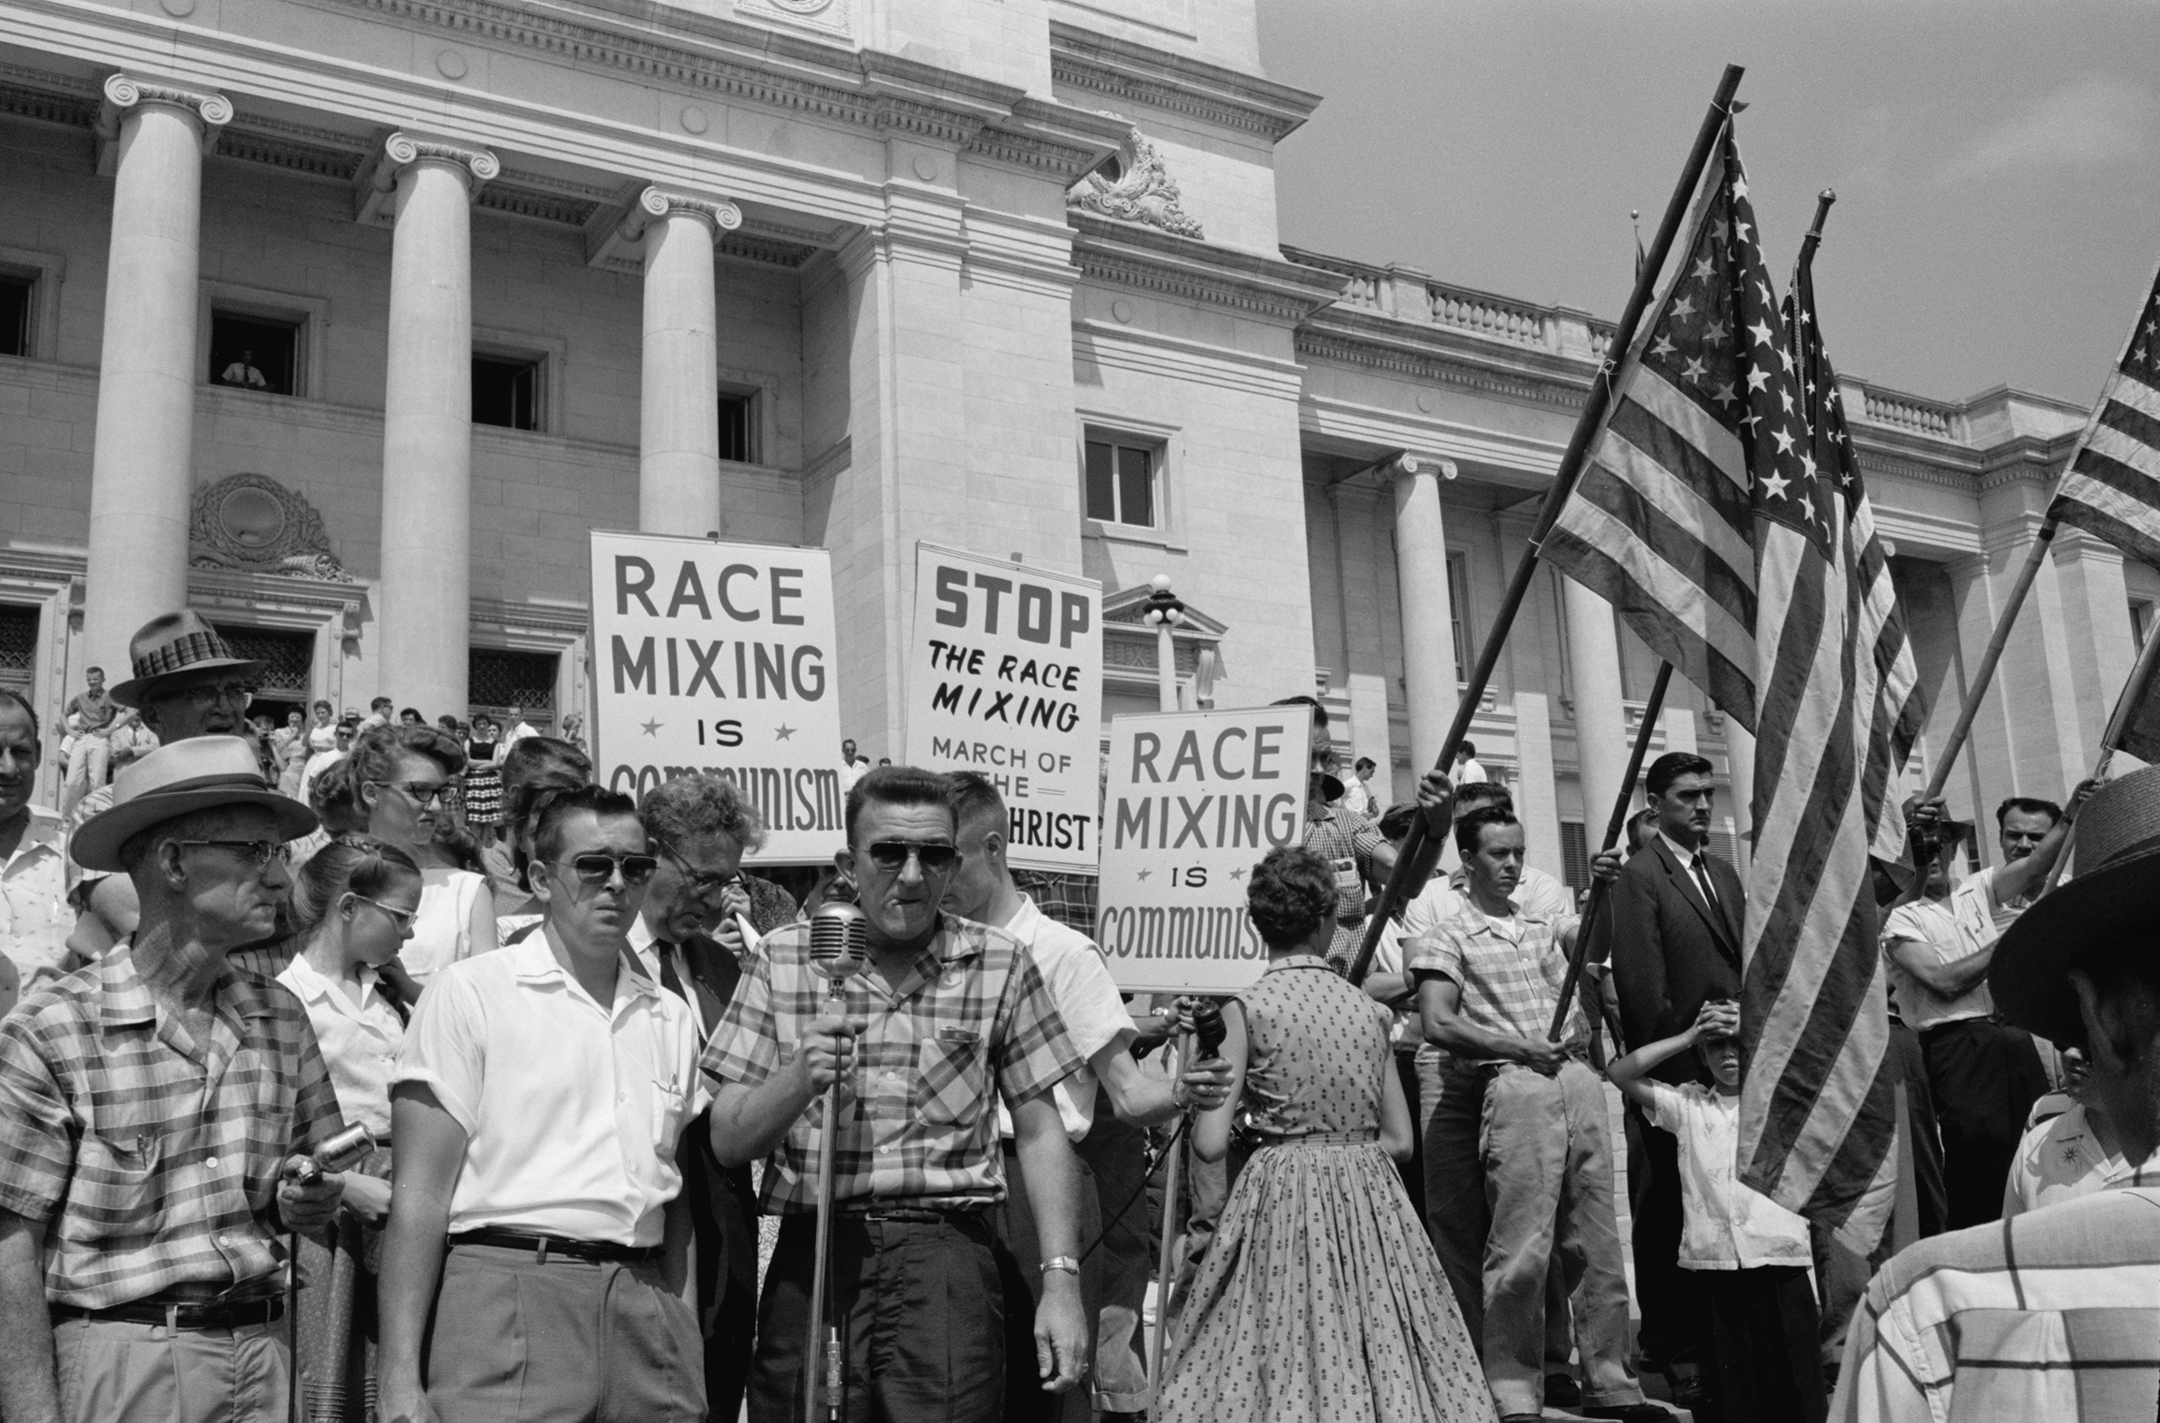 Black and white photo of White people holding signs decrying "race mixing" and American flags at a protest on the steps of a government building